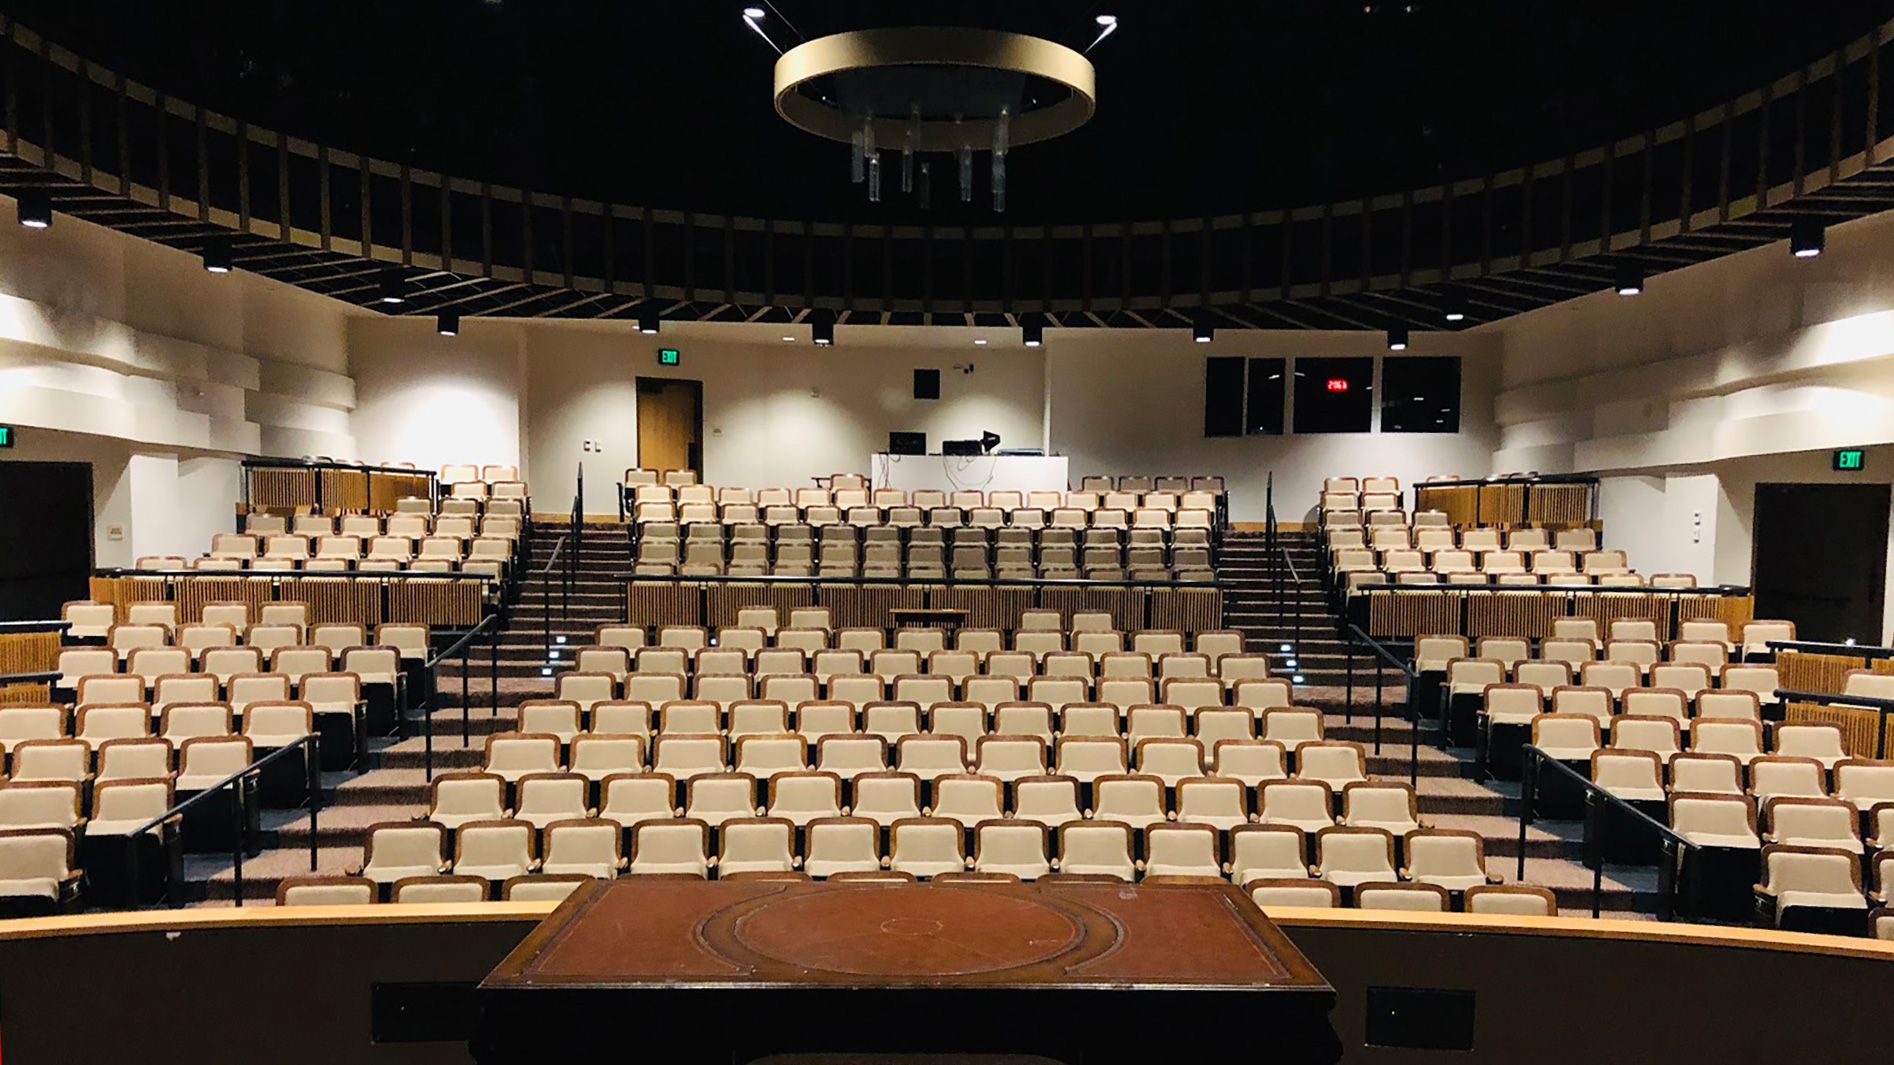 View from stage, looking out at multi-leveled sections of seating.